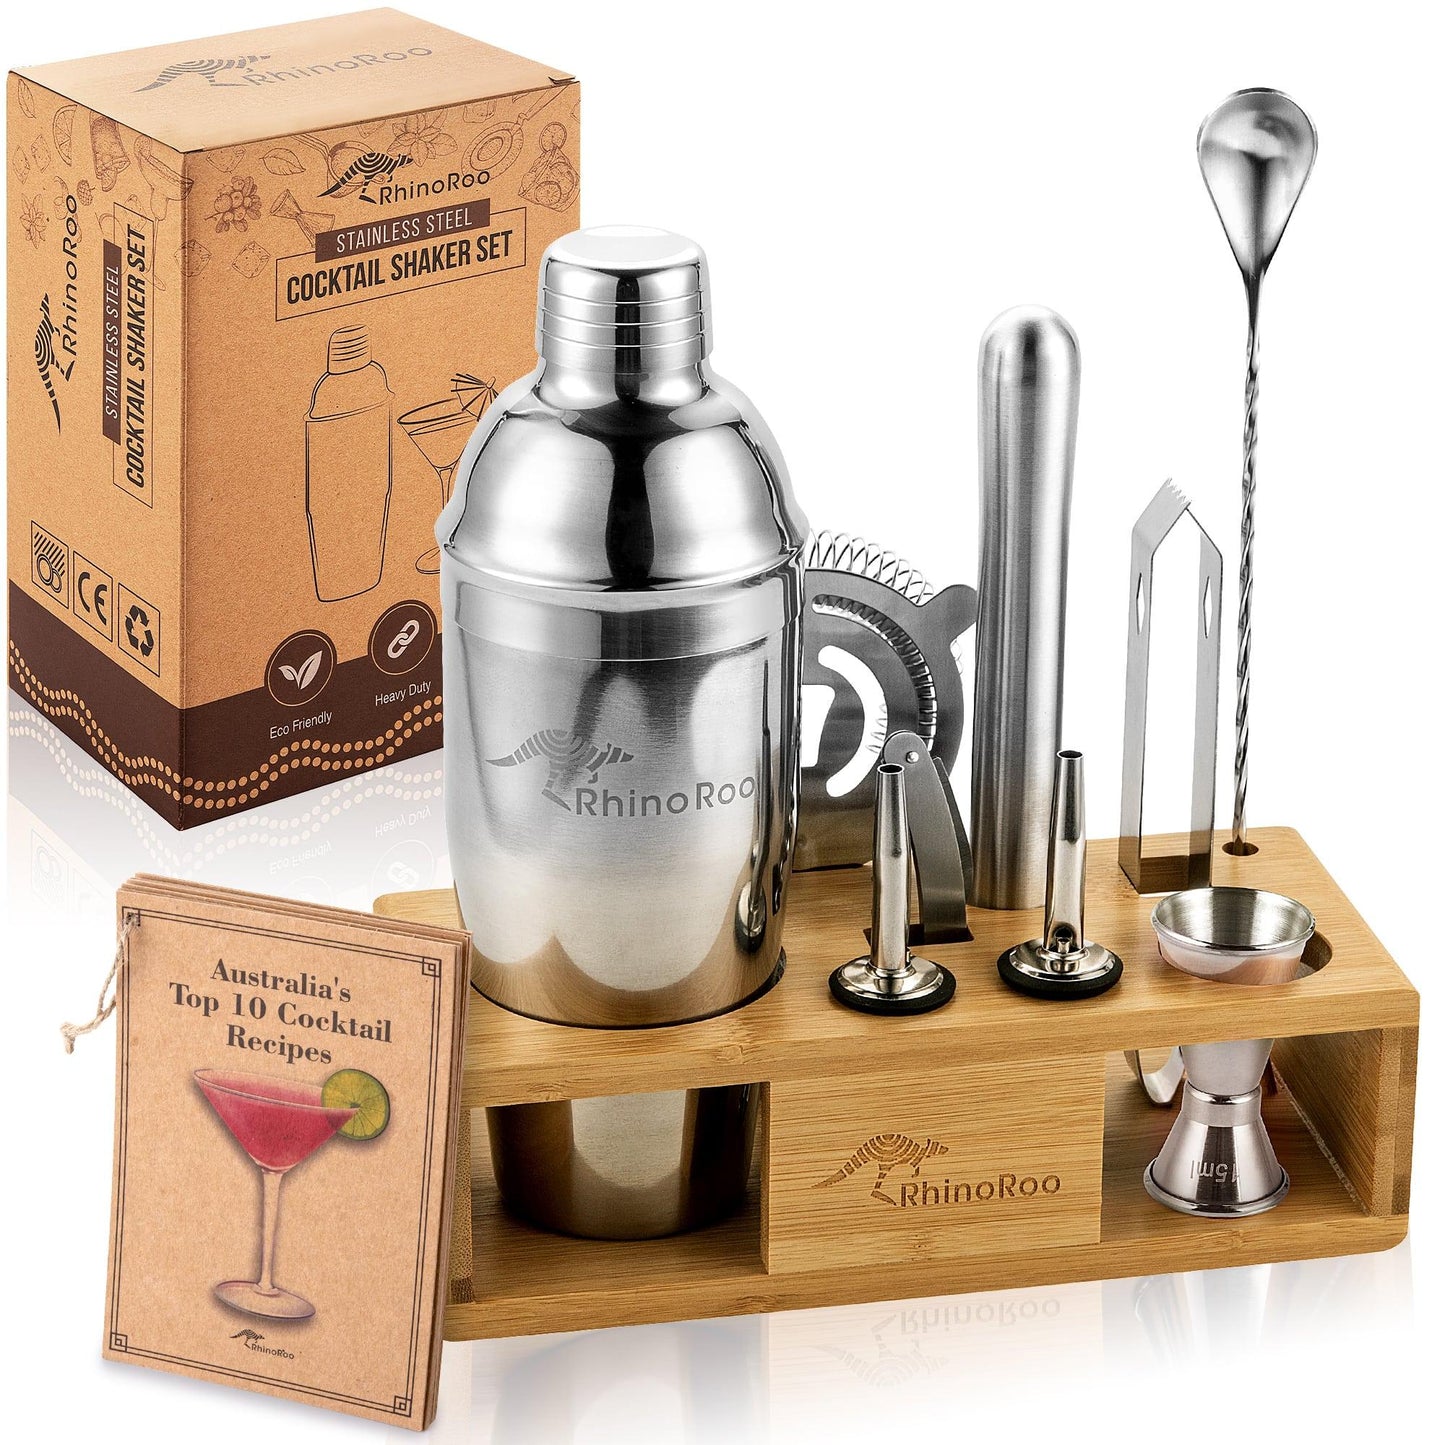 analog ale hund RhinoRoo Cobbler Cocktail Shaker Set - Bamboo Stand and Aussie Recipes